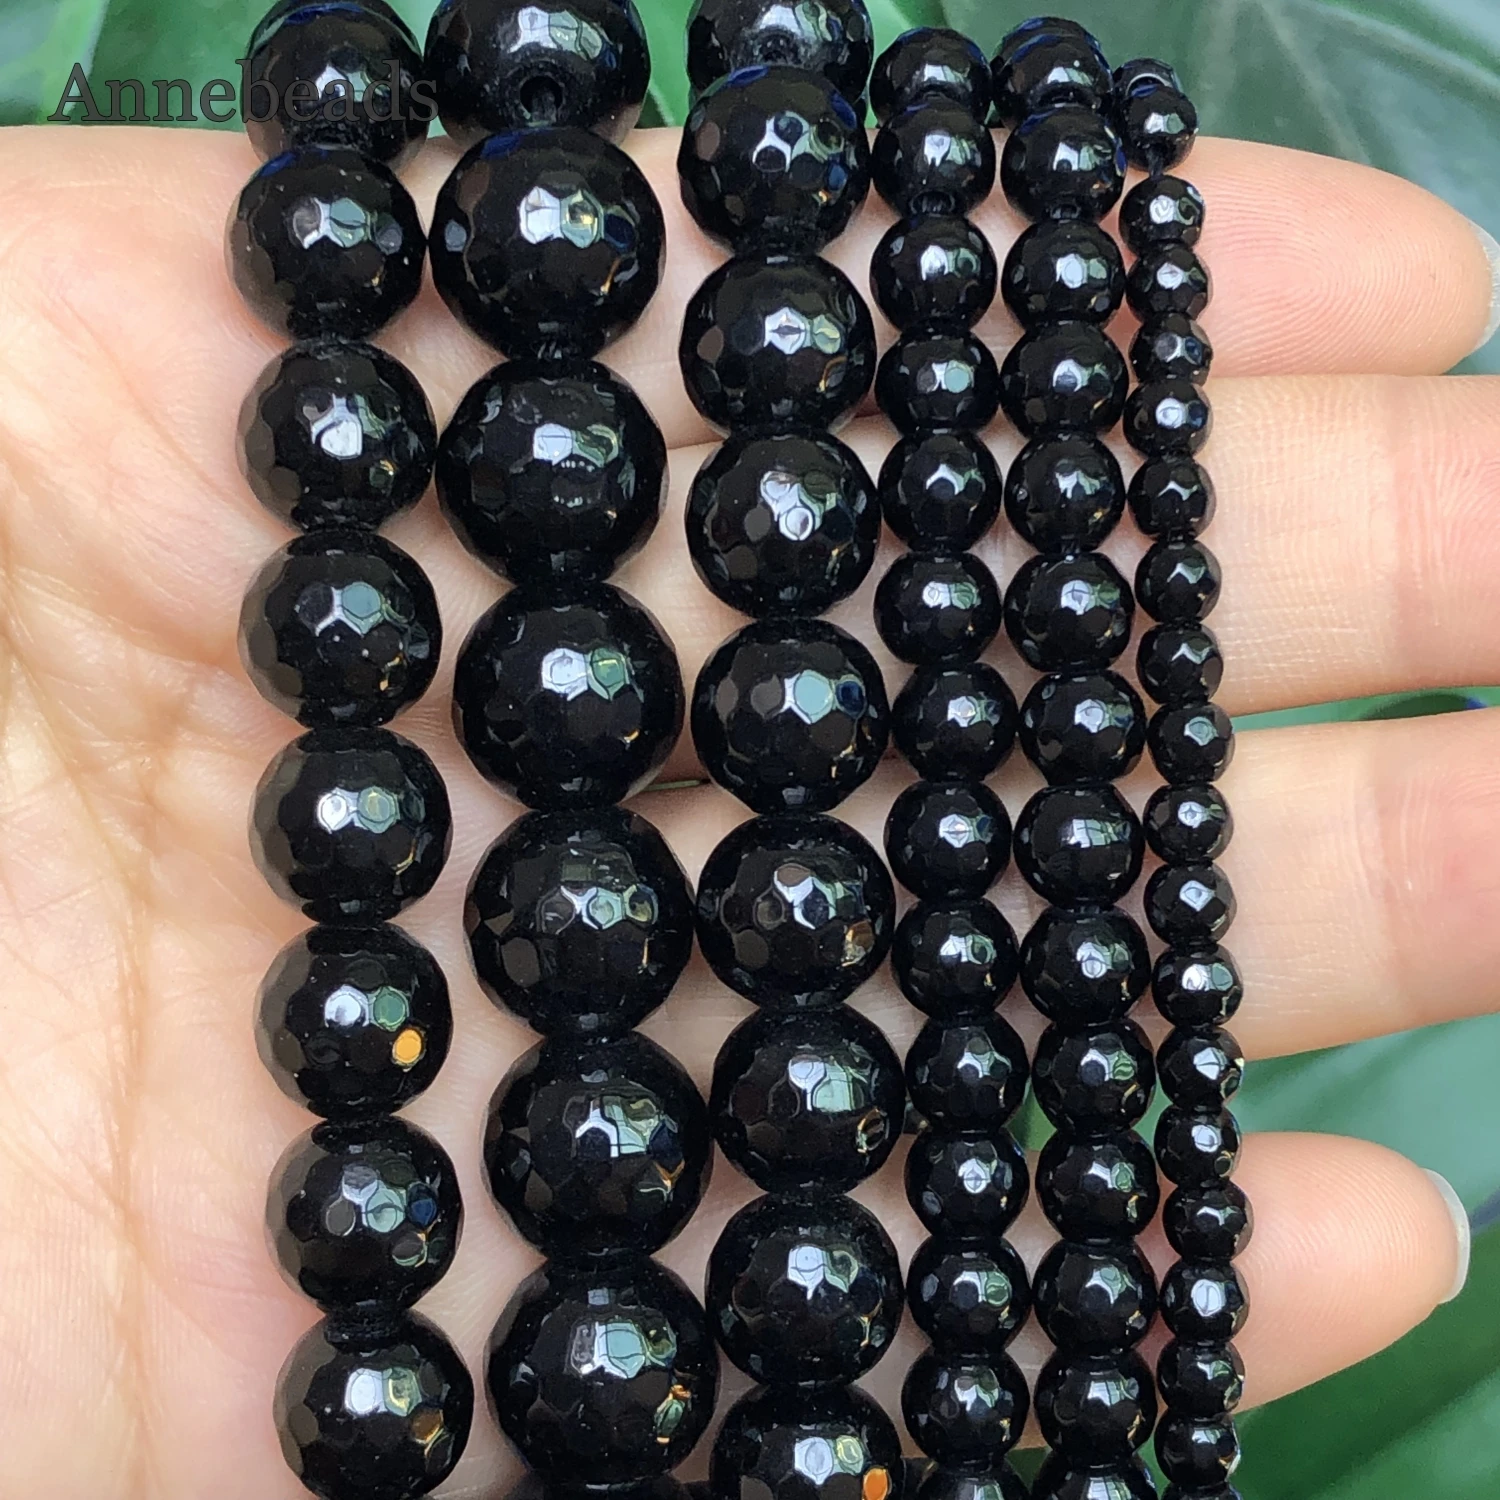 

Natural Stone Faceted Black Jades Round Loose Spacer Beads For Jewelry Making 4/6/8/10mm DIY Bracelet Necklaces 15"Inches